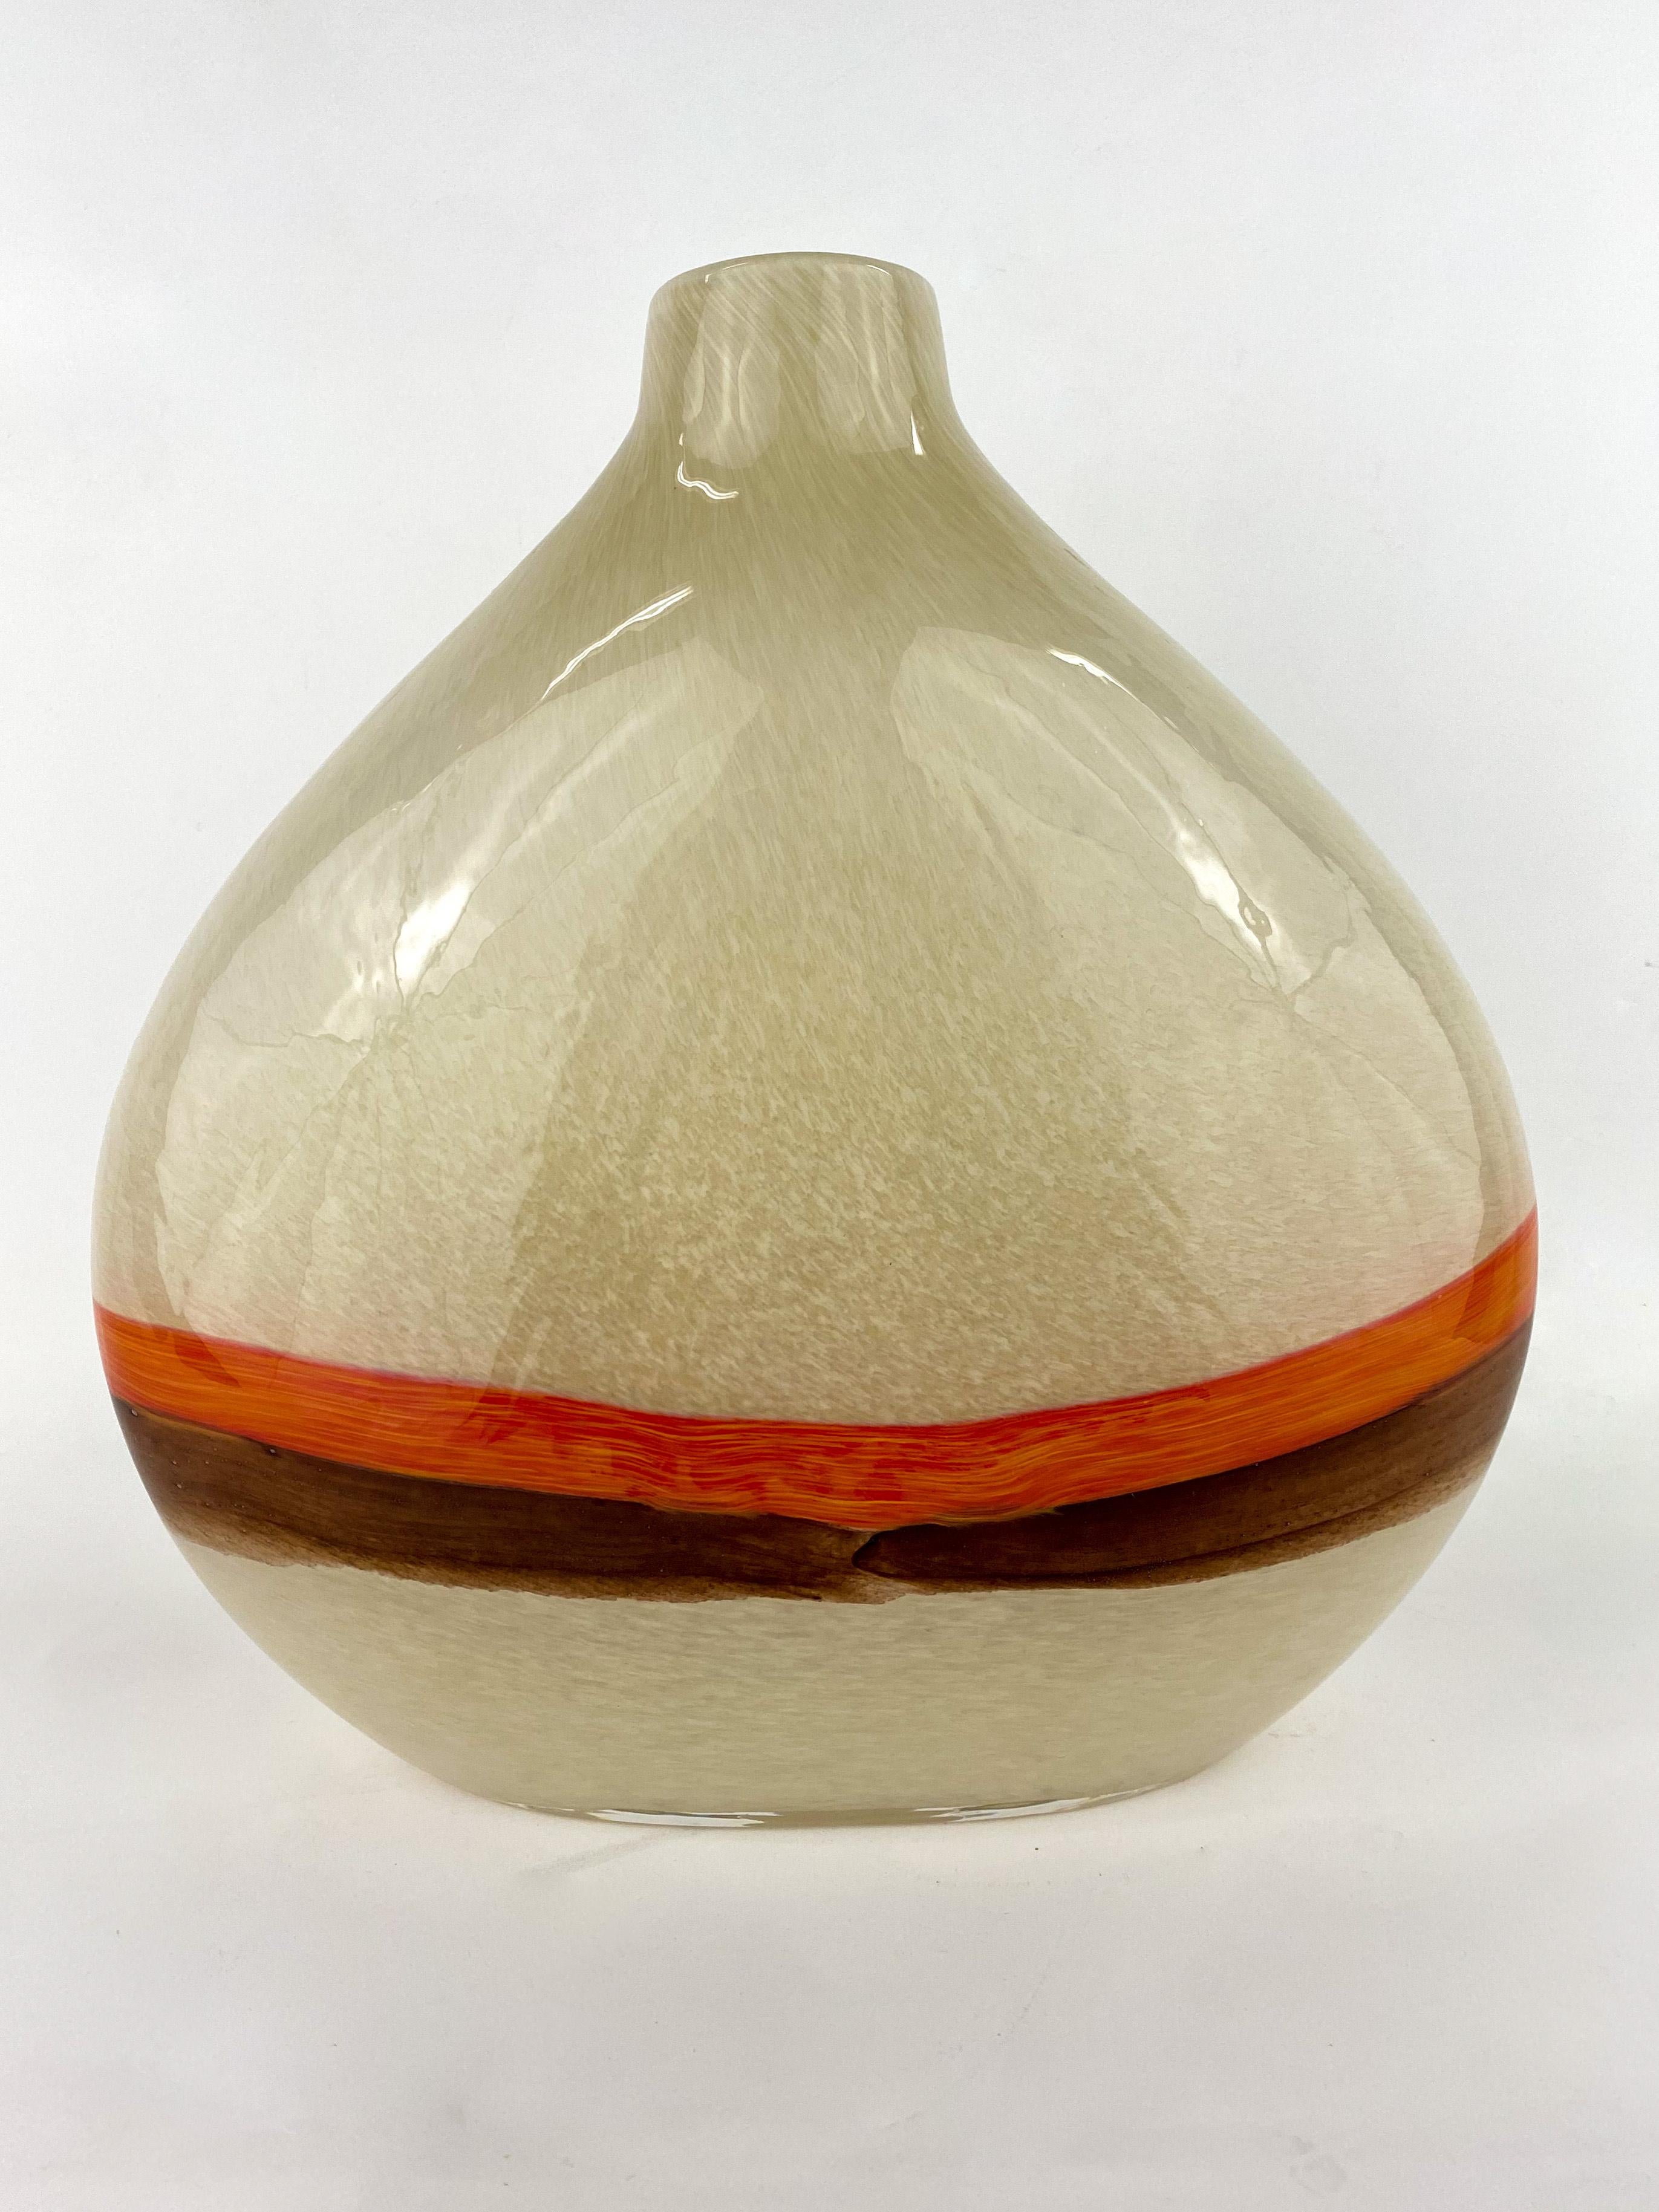 An elegant Mid-Century Modern Murano glass decorative vase in beige tone with brown and orange stripe design. Very stylish and featuring earthy tones, this vase will add a touch of style to any space.

Dimensions: 12